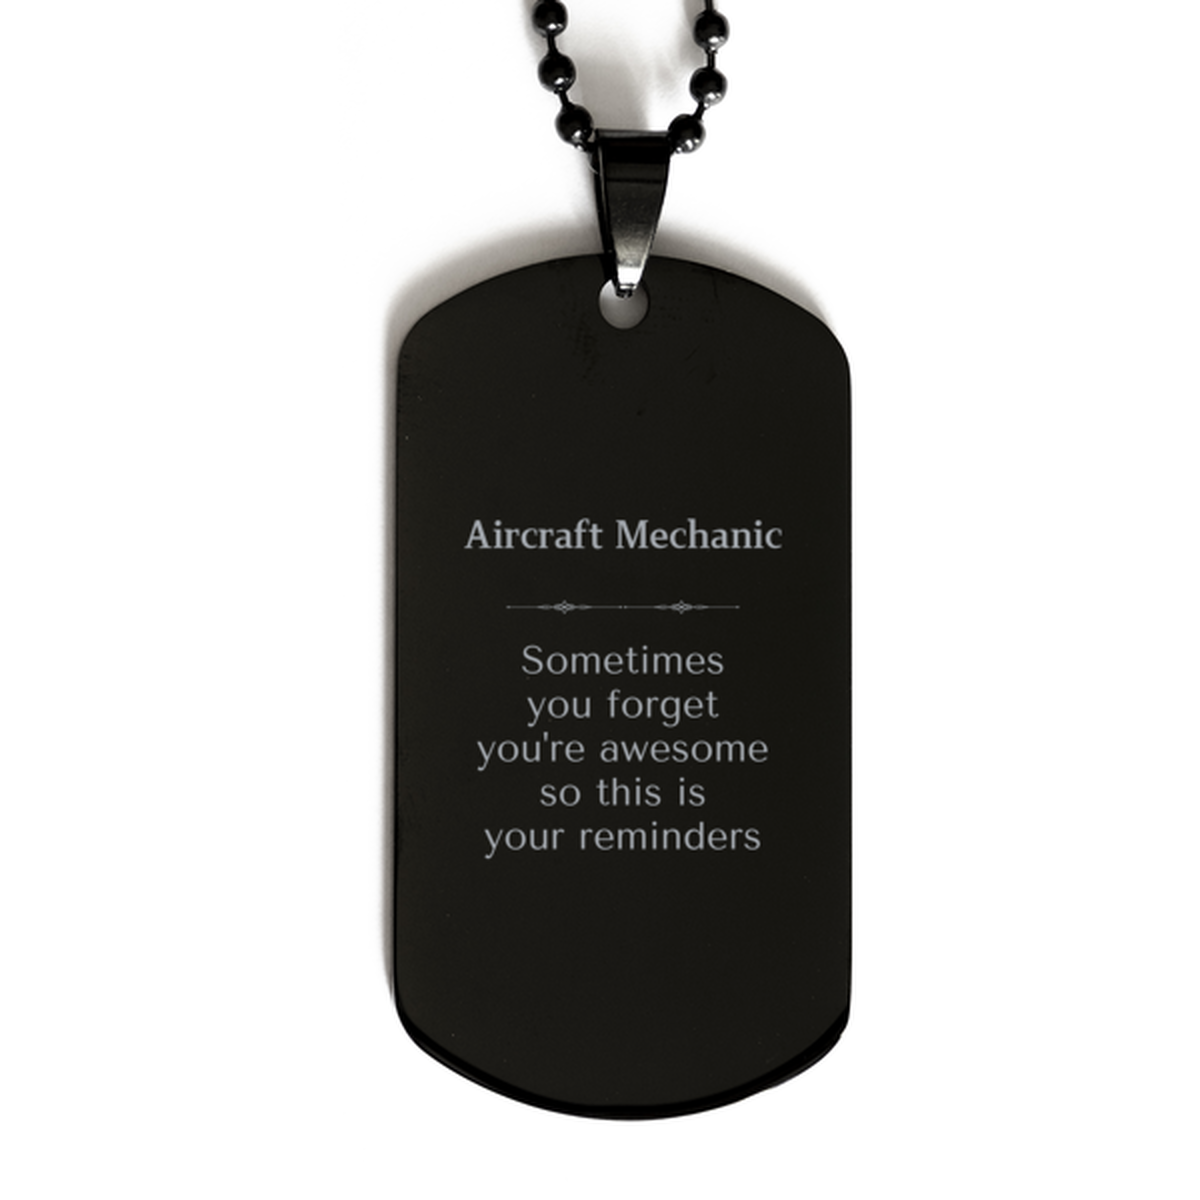 Sentimental Aircraft Mechanic Black Dog Tag, Aircraft Mechanic Sometimes you forget you're awesome so this is your reminders, Graduation Christmas Birthday Gifts for Aircraft Mechanic, Men, Women, Coworkers